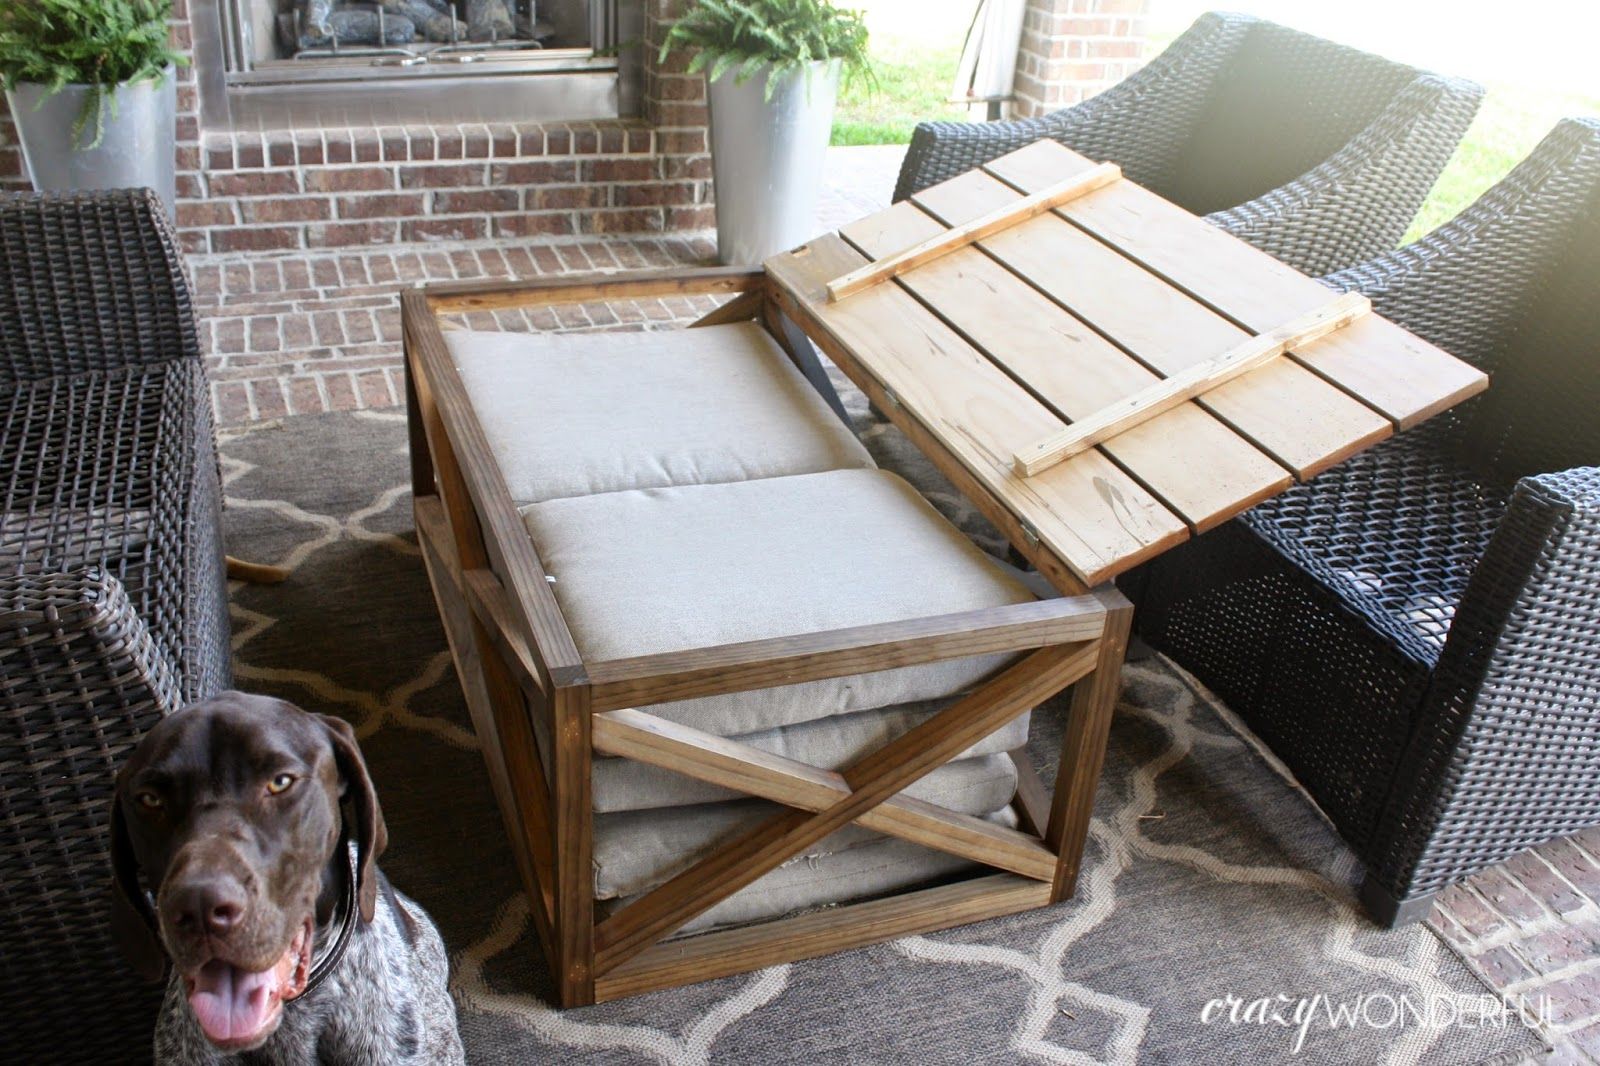 Diy Outdoor Coffee Table | With Storage – Crazy Wonderful With Regard To Outdoor Coffee Tables With Storage (View 6 of 20)